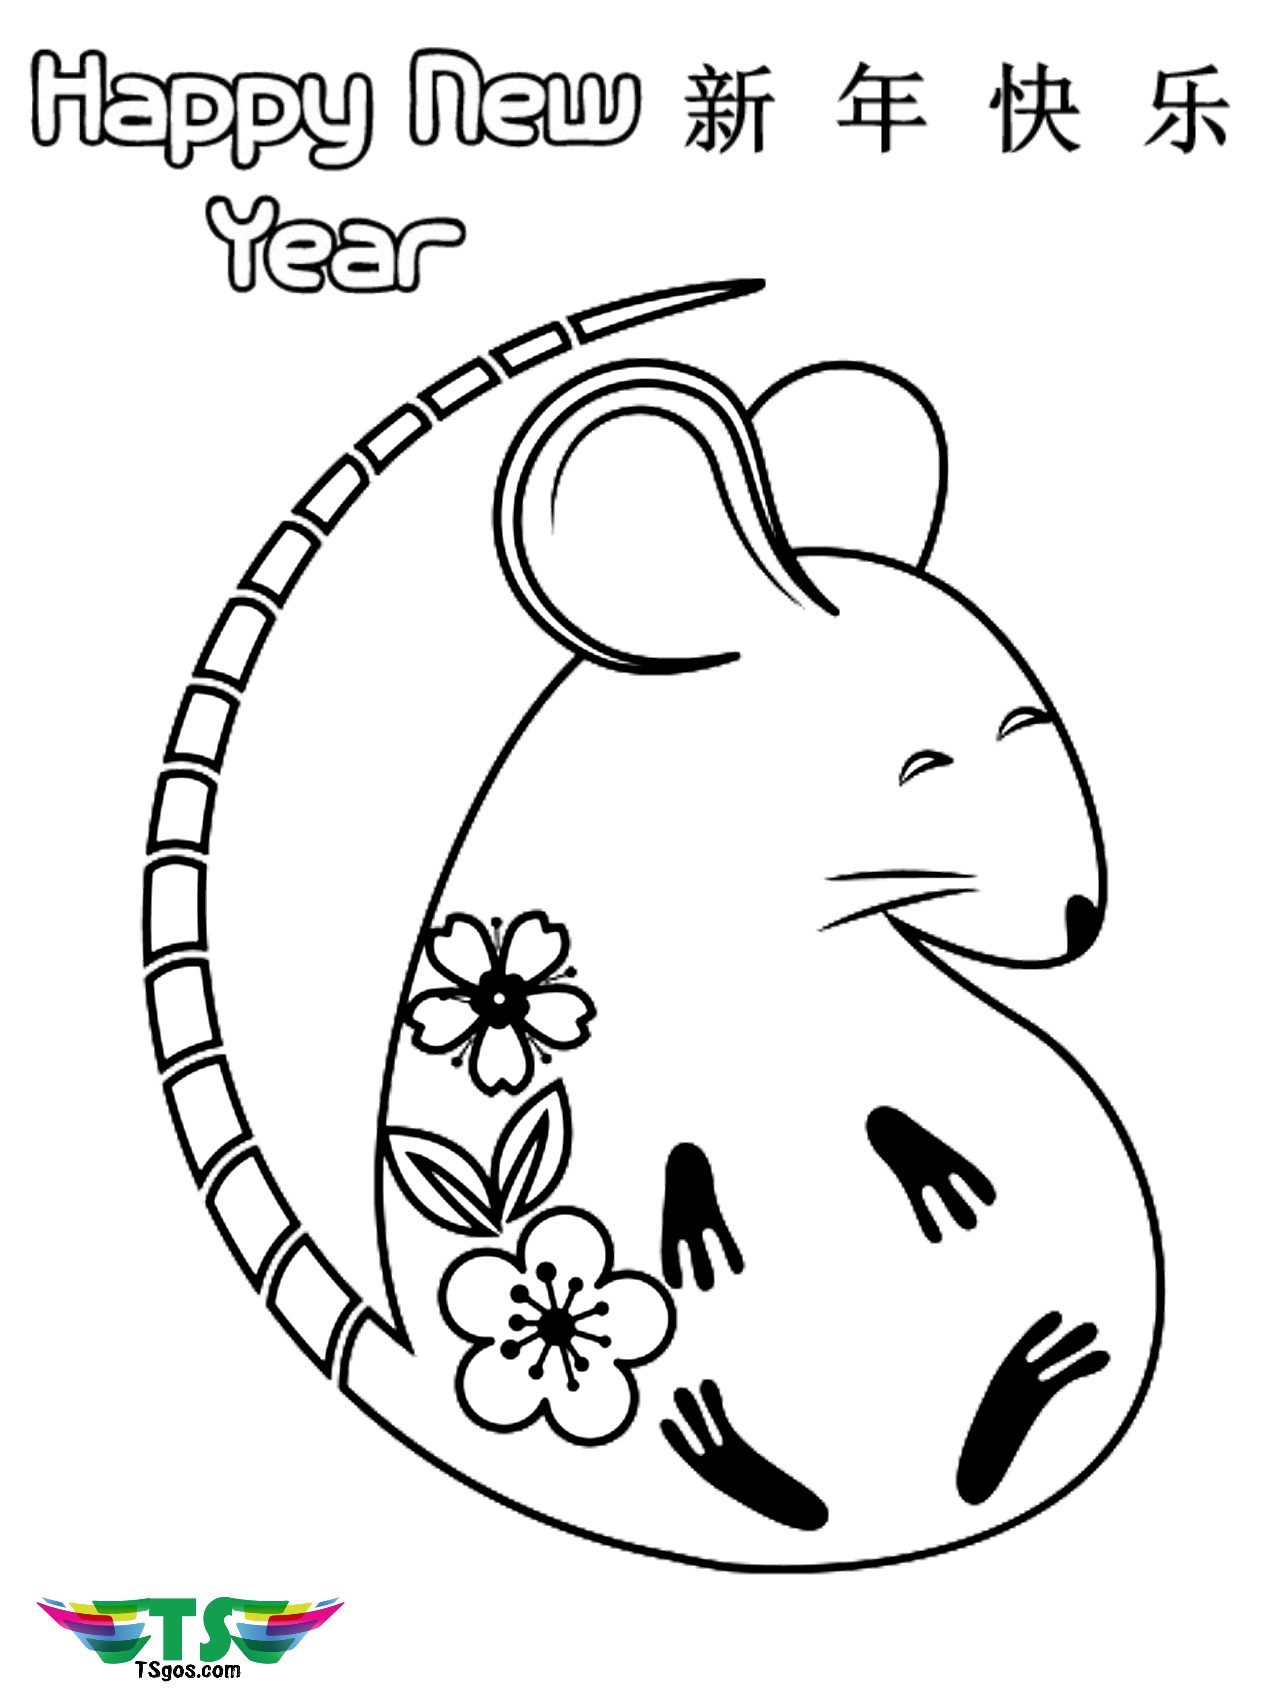 Happy chinese new year 2020 coloring page